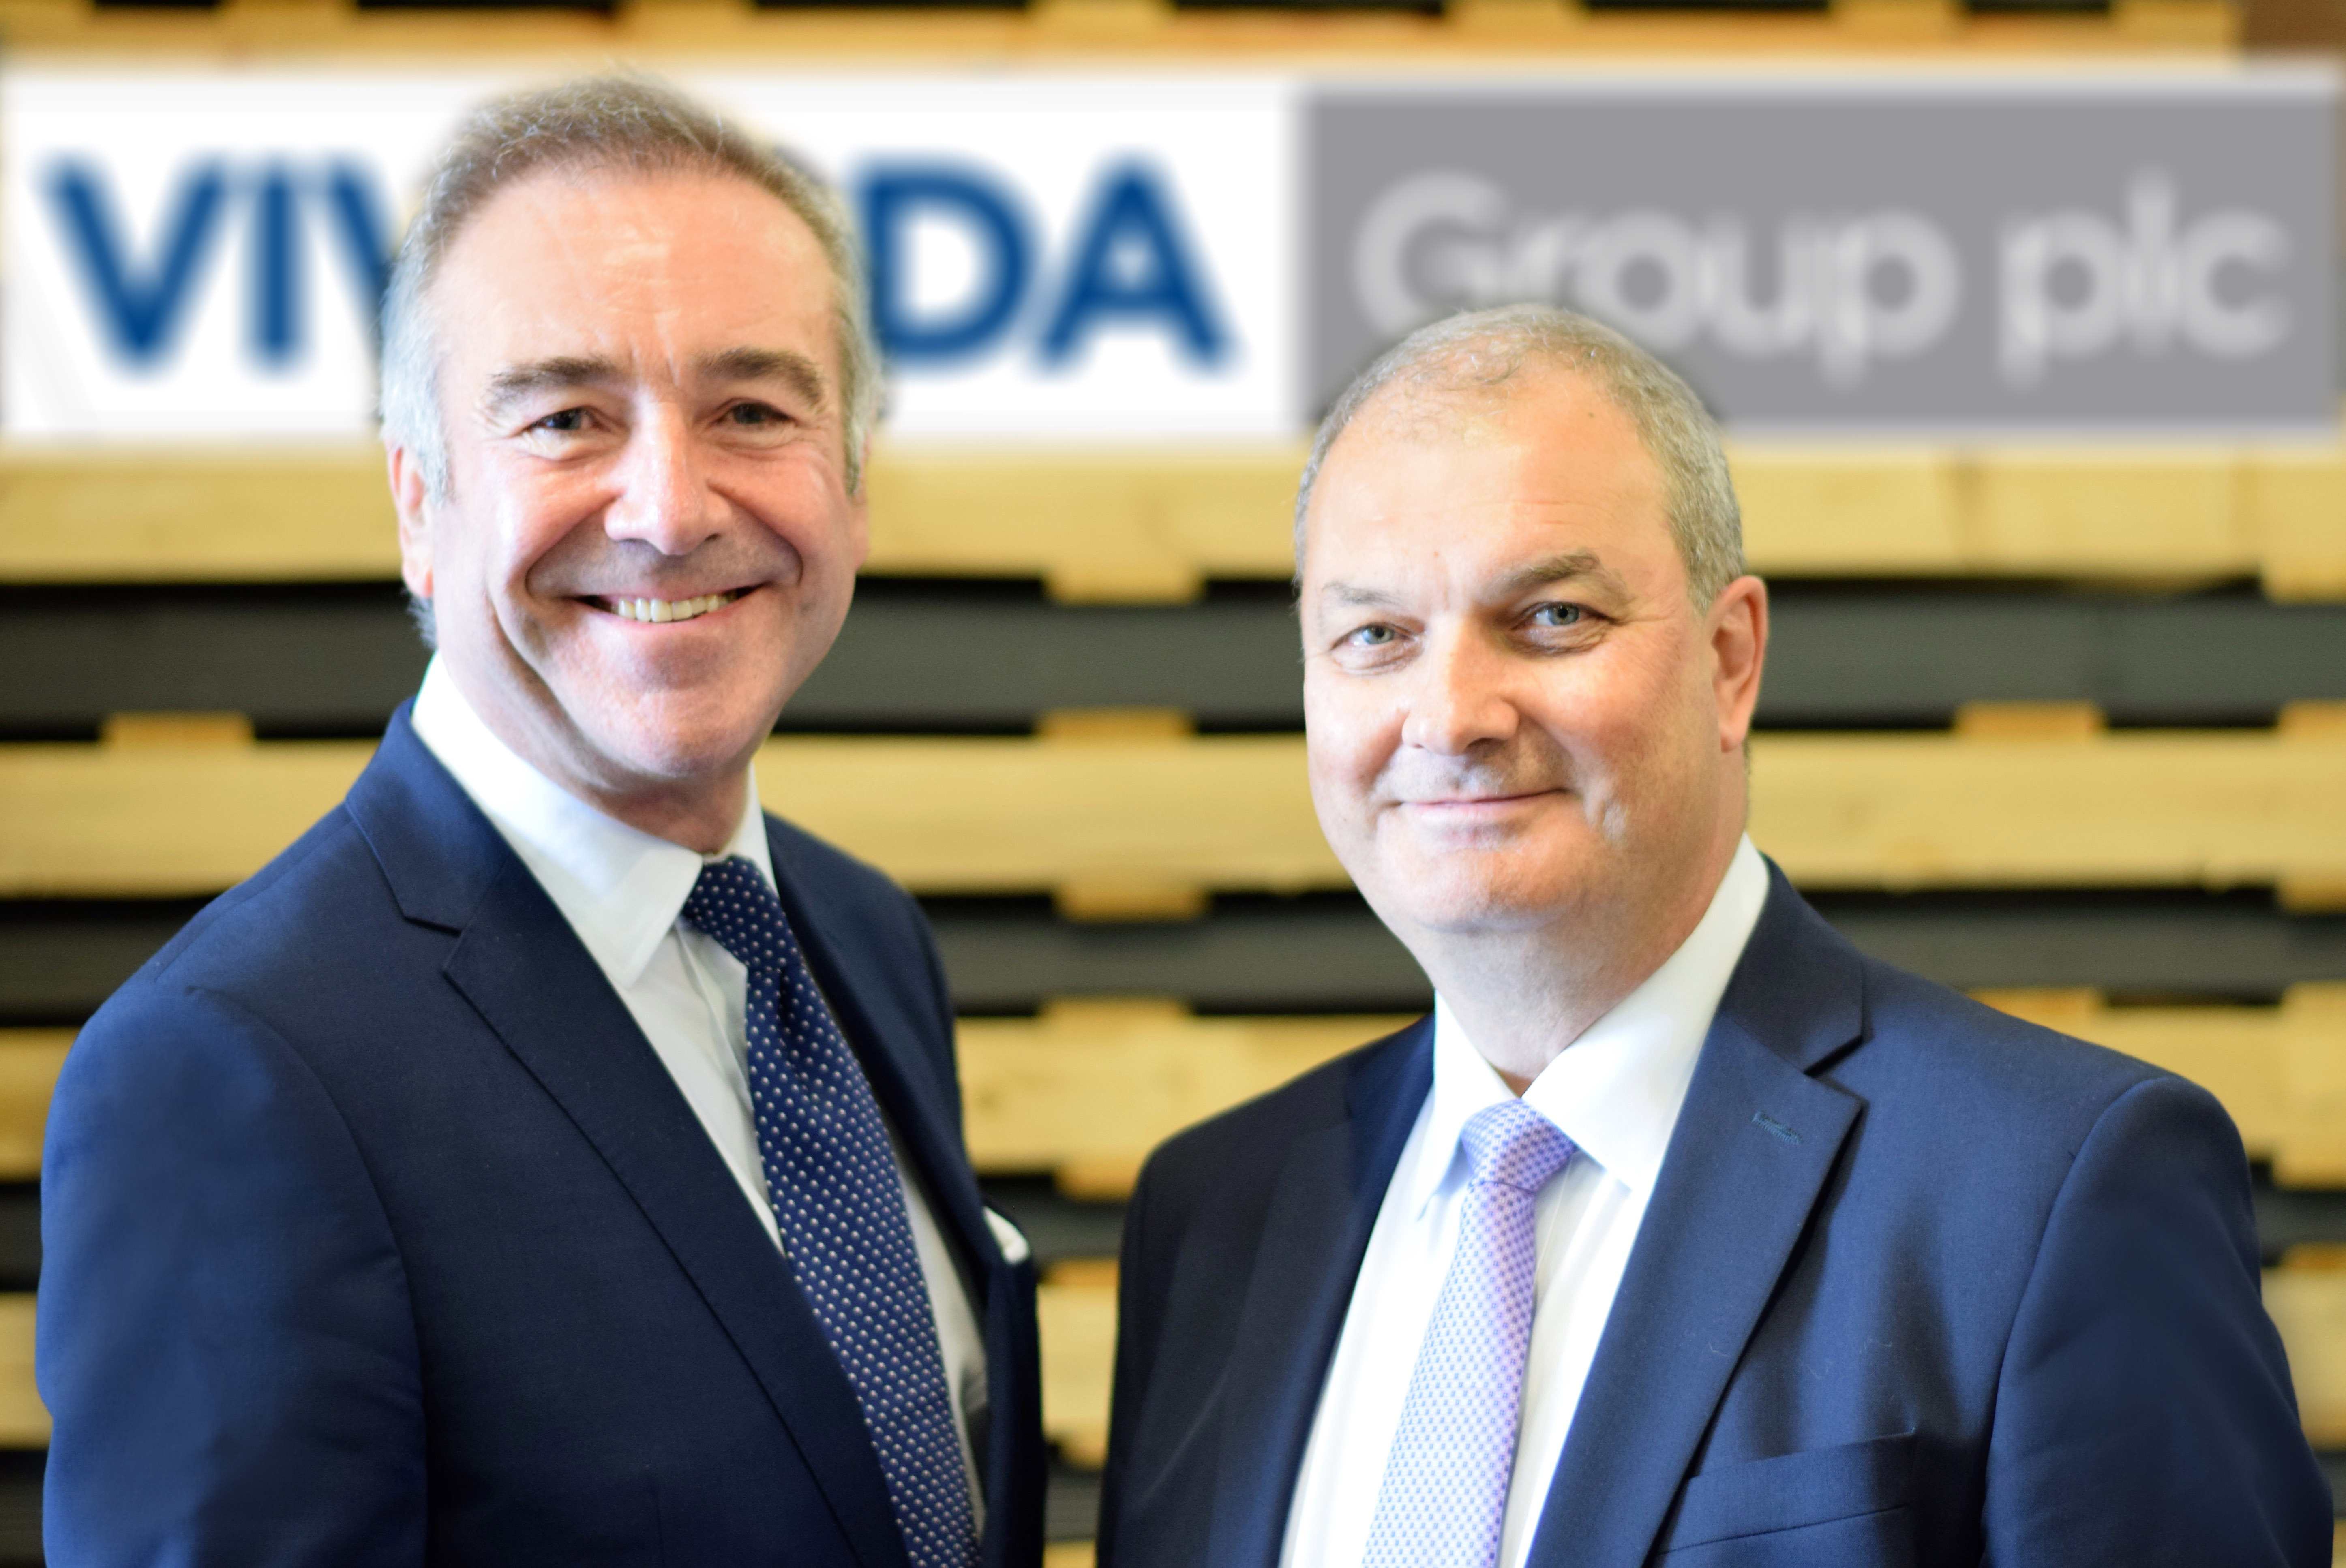 Vivalda Group appoints former SIG director to drive growth and innovation @VivaldaLimited